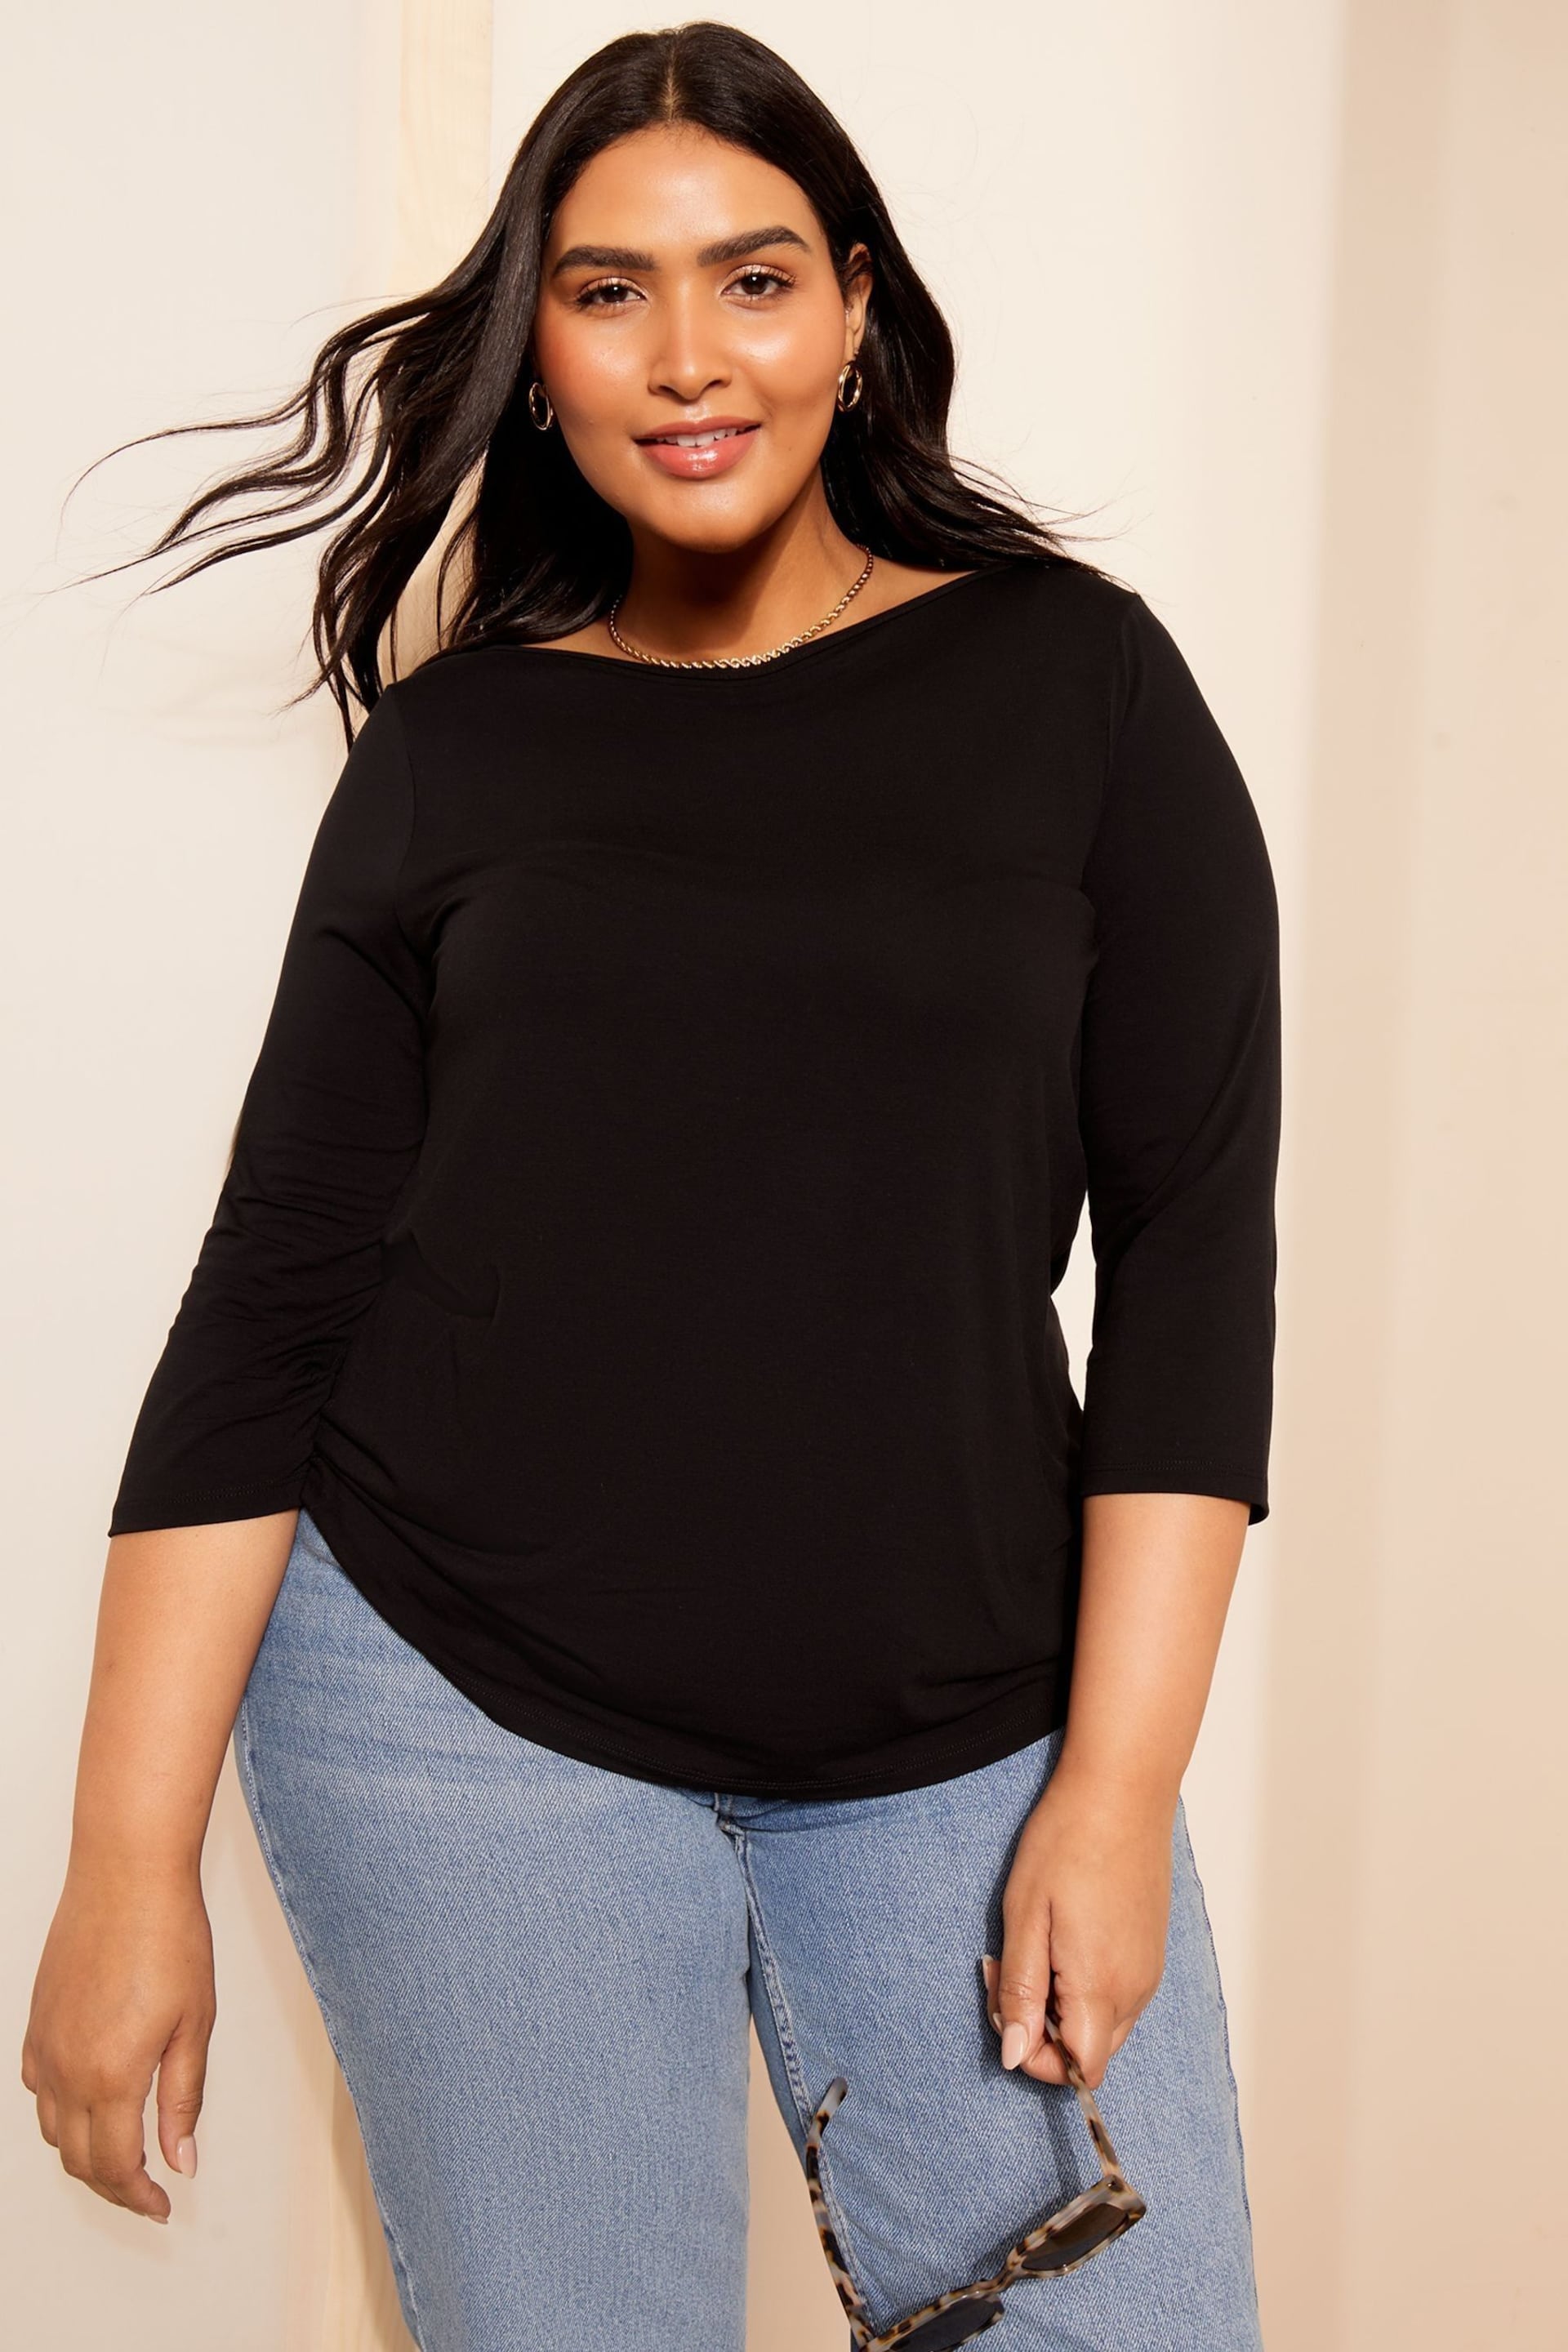 Curves Like These Black Boat Neck T-Shirt - Image 1 of 4